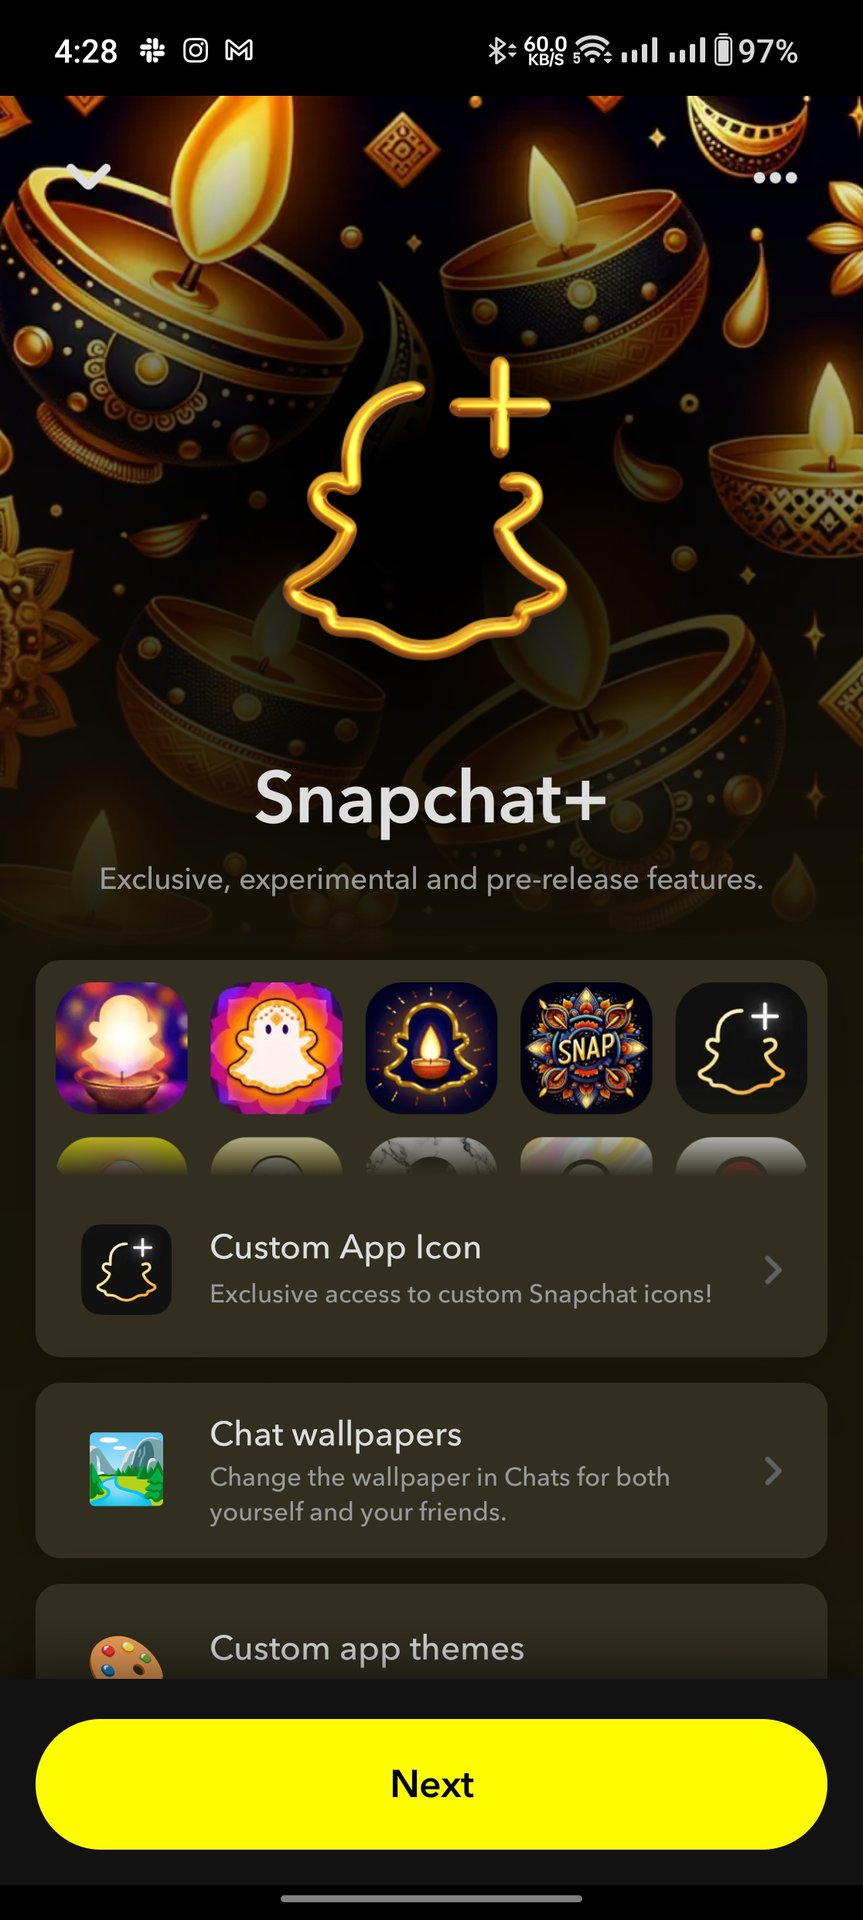 Snapchat Plus Pricing and features (5)